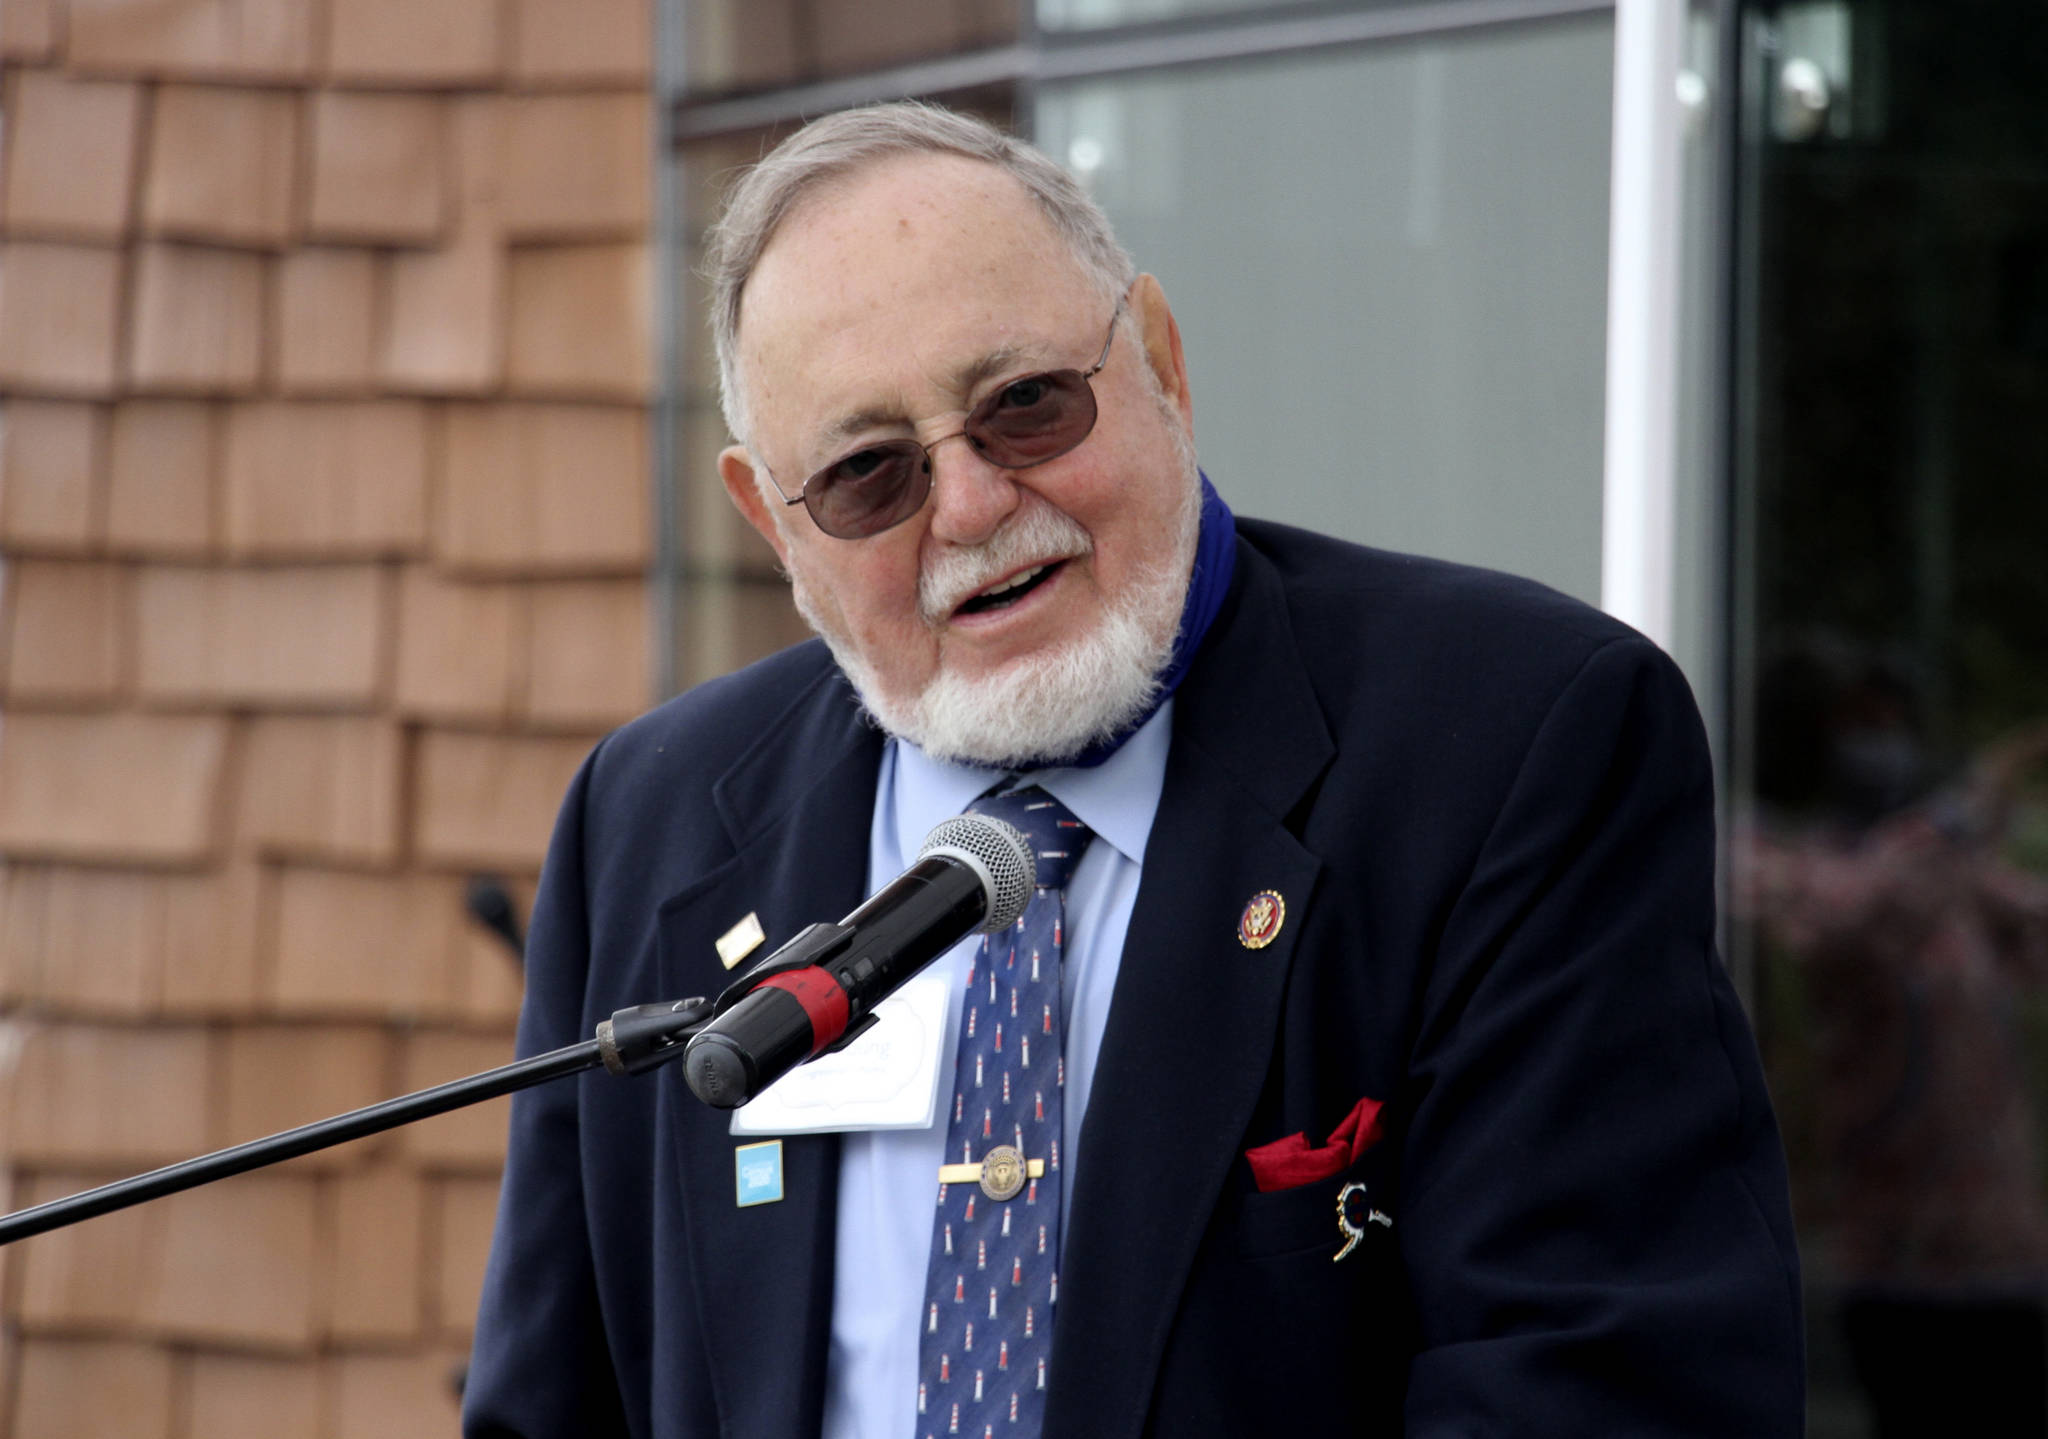 In this August photo, U.S. Rep. Don Young, an Alaska Republican, speaks during a ceremony in Anchorage, Alaska, celebrating the opening of a Lady Justice Task Force cold case office which will specialize in cases involving missing or murdered Indigenous women. Young announced Thursday, Nov. 12, 2020, on Twitter that he had tested positive for COVID-19. (AP Photo / Mark Thiessen)